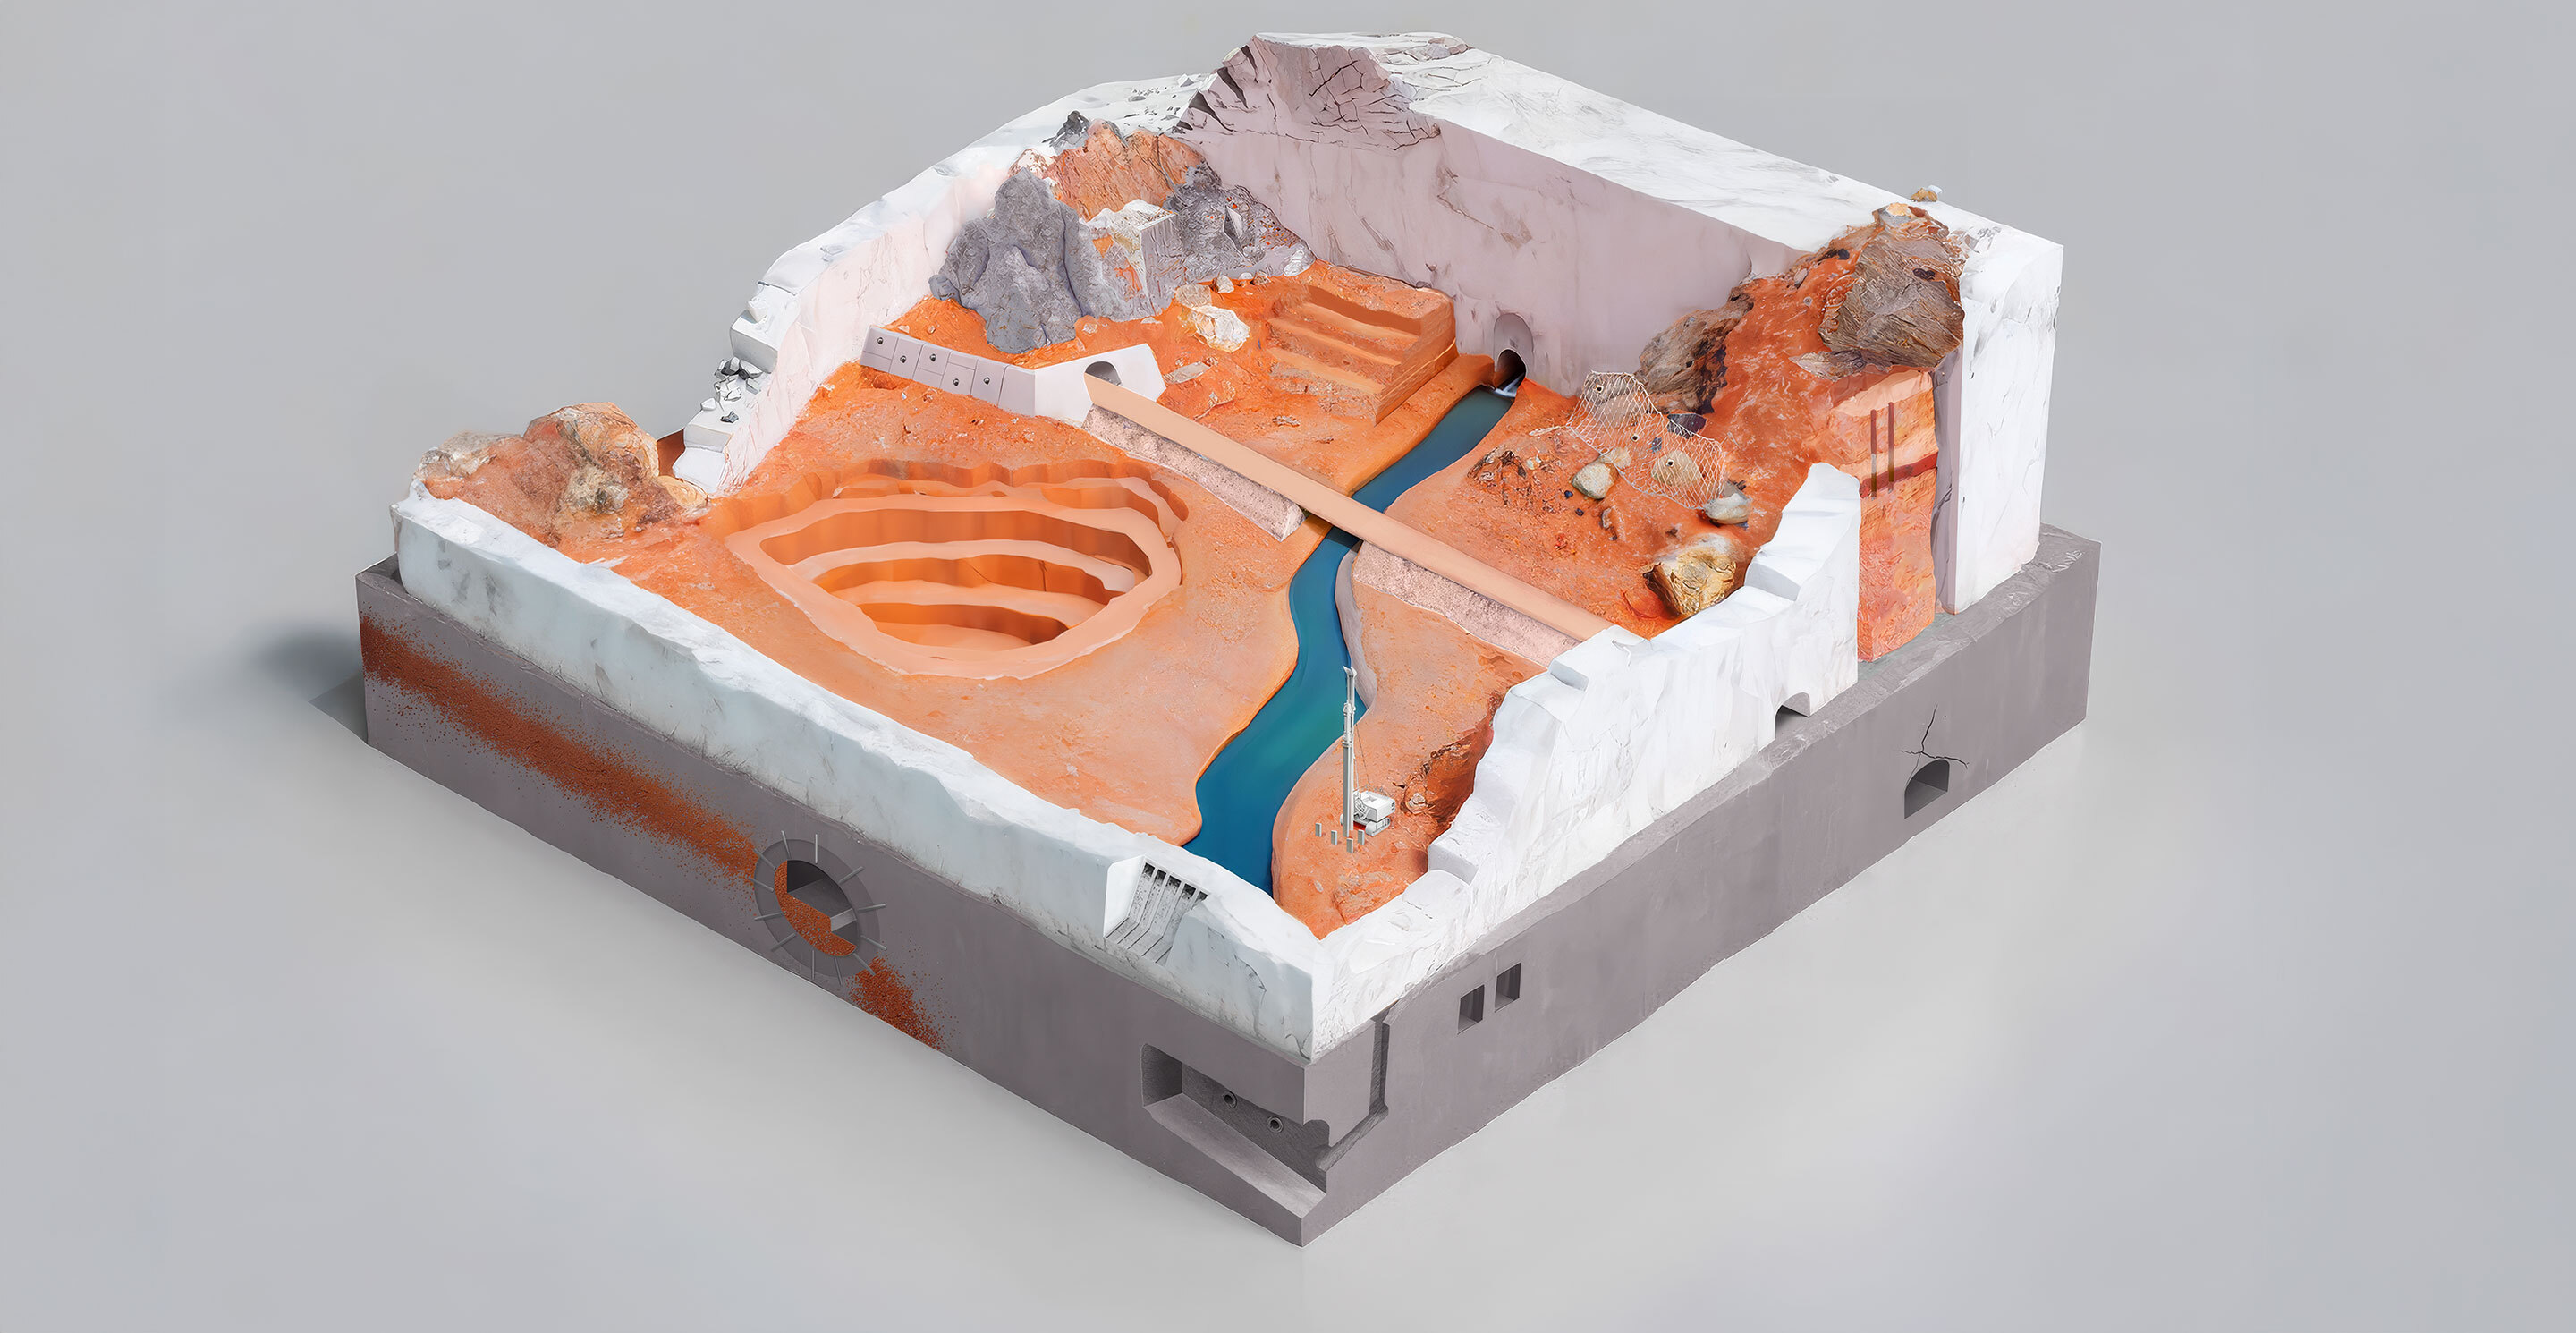 3D model highlighting applications for geotechnical software tools.